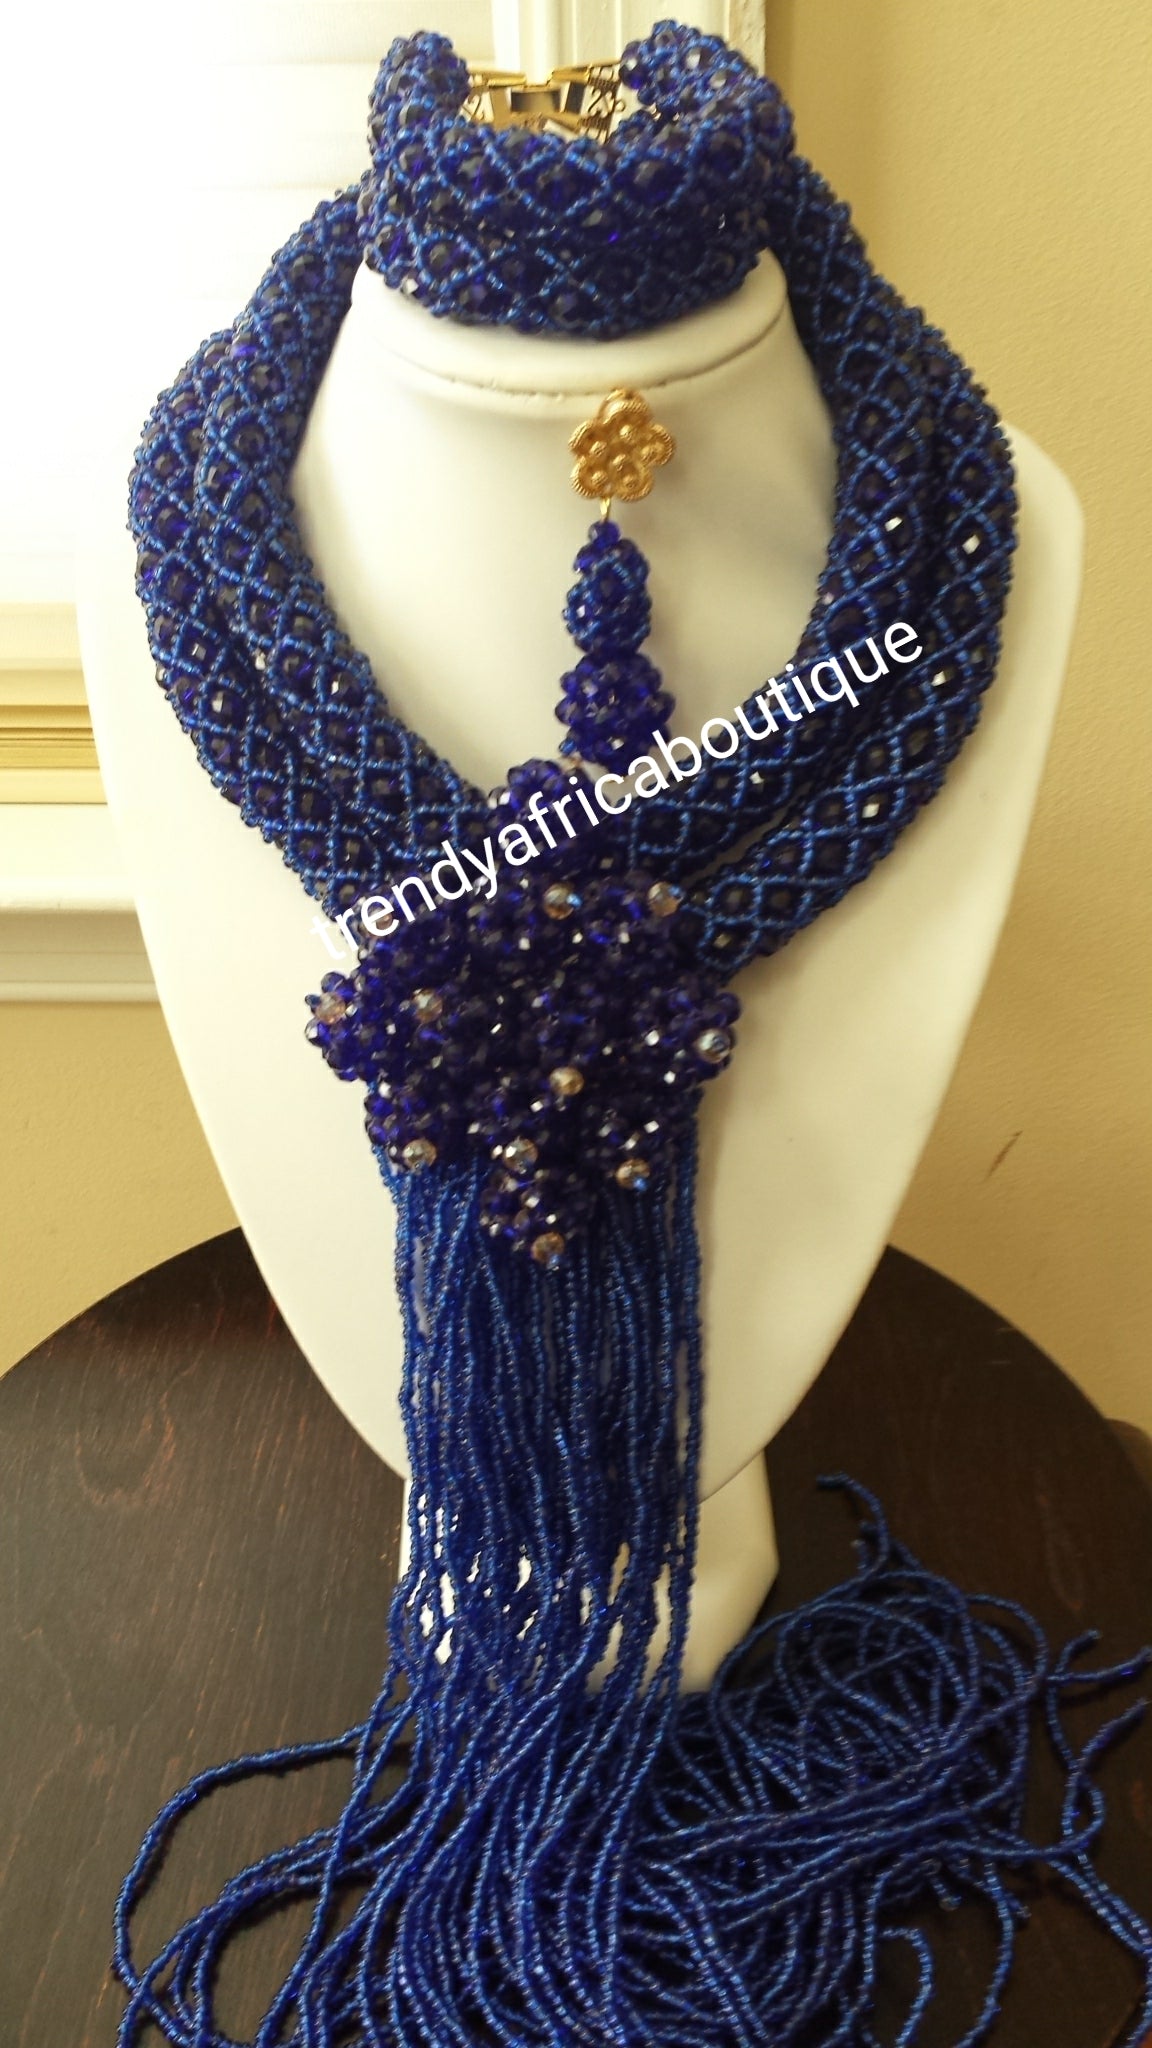 SALE: Nigerian wedding beaded-Necklace set. 2 row necklace and bracelet with drop earrings. Nigerian/African weddings. Sold as a set